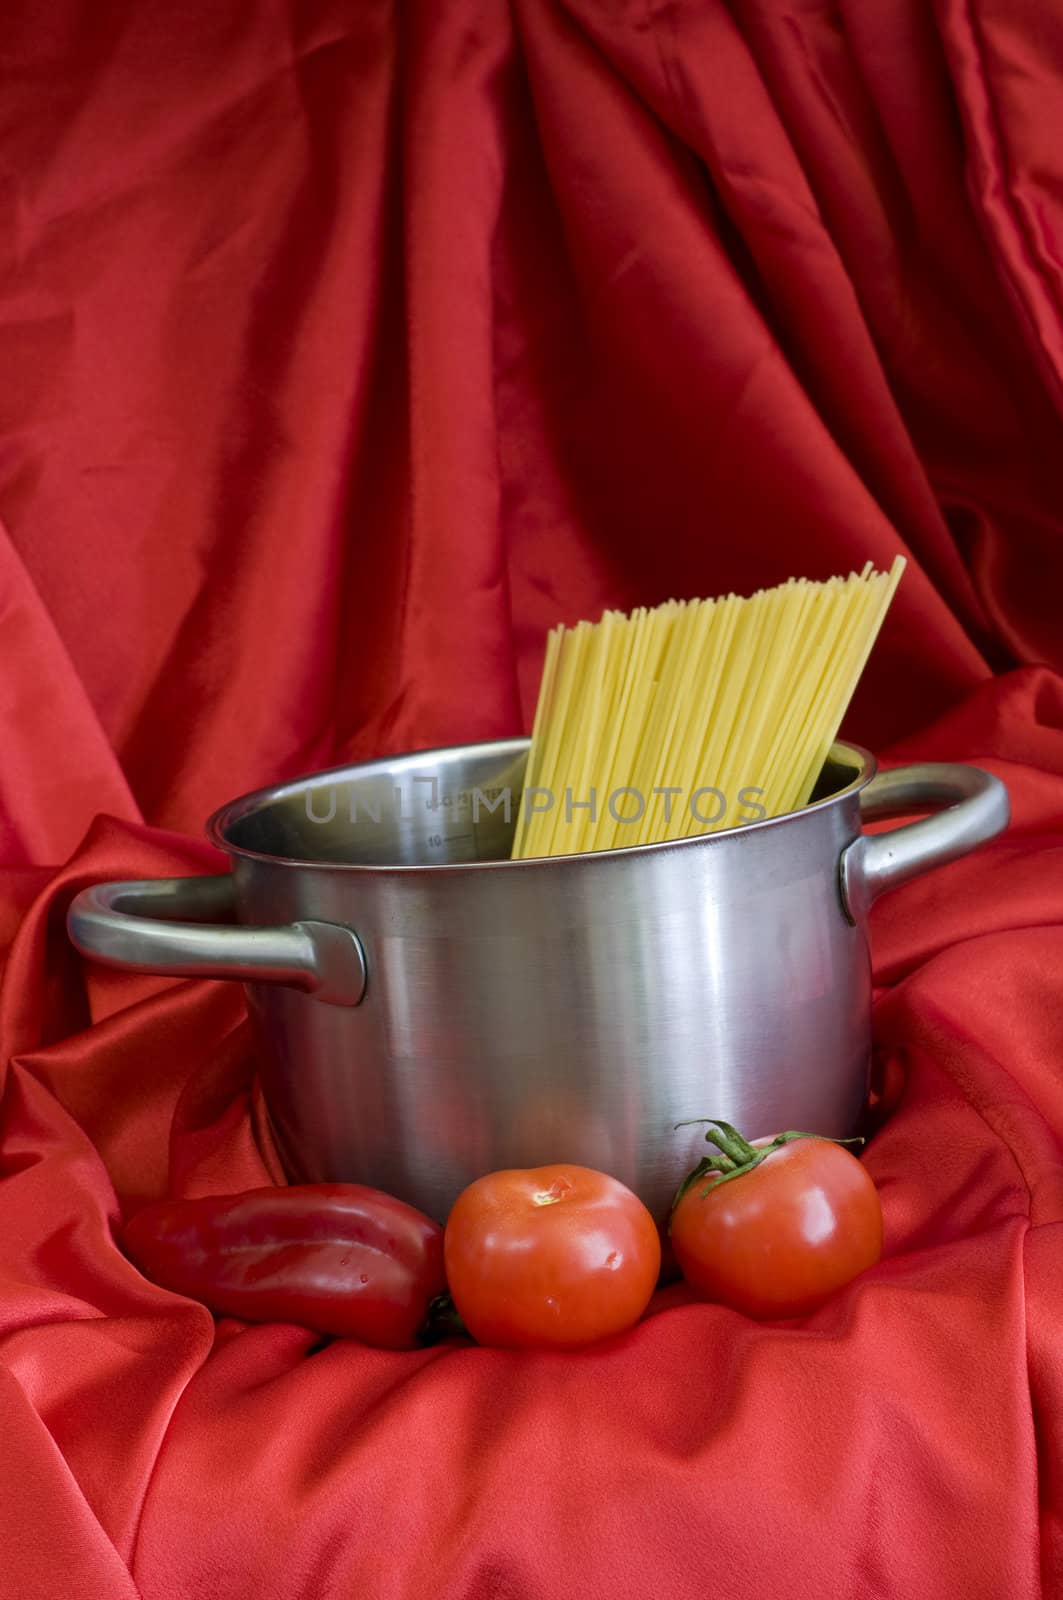 shiny silver pot and spaghetti, on red background